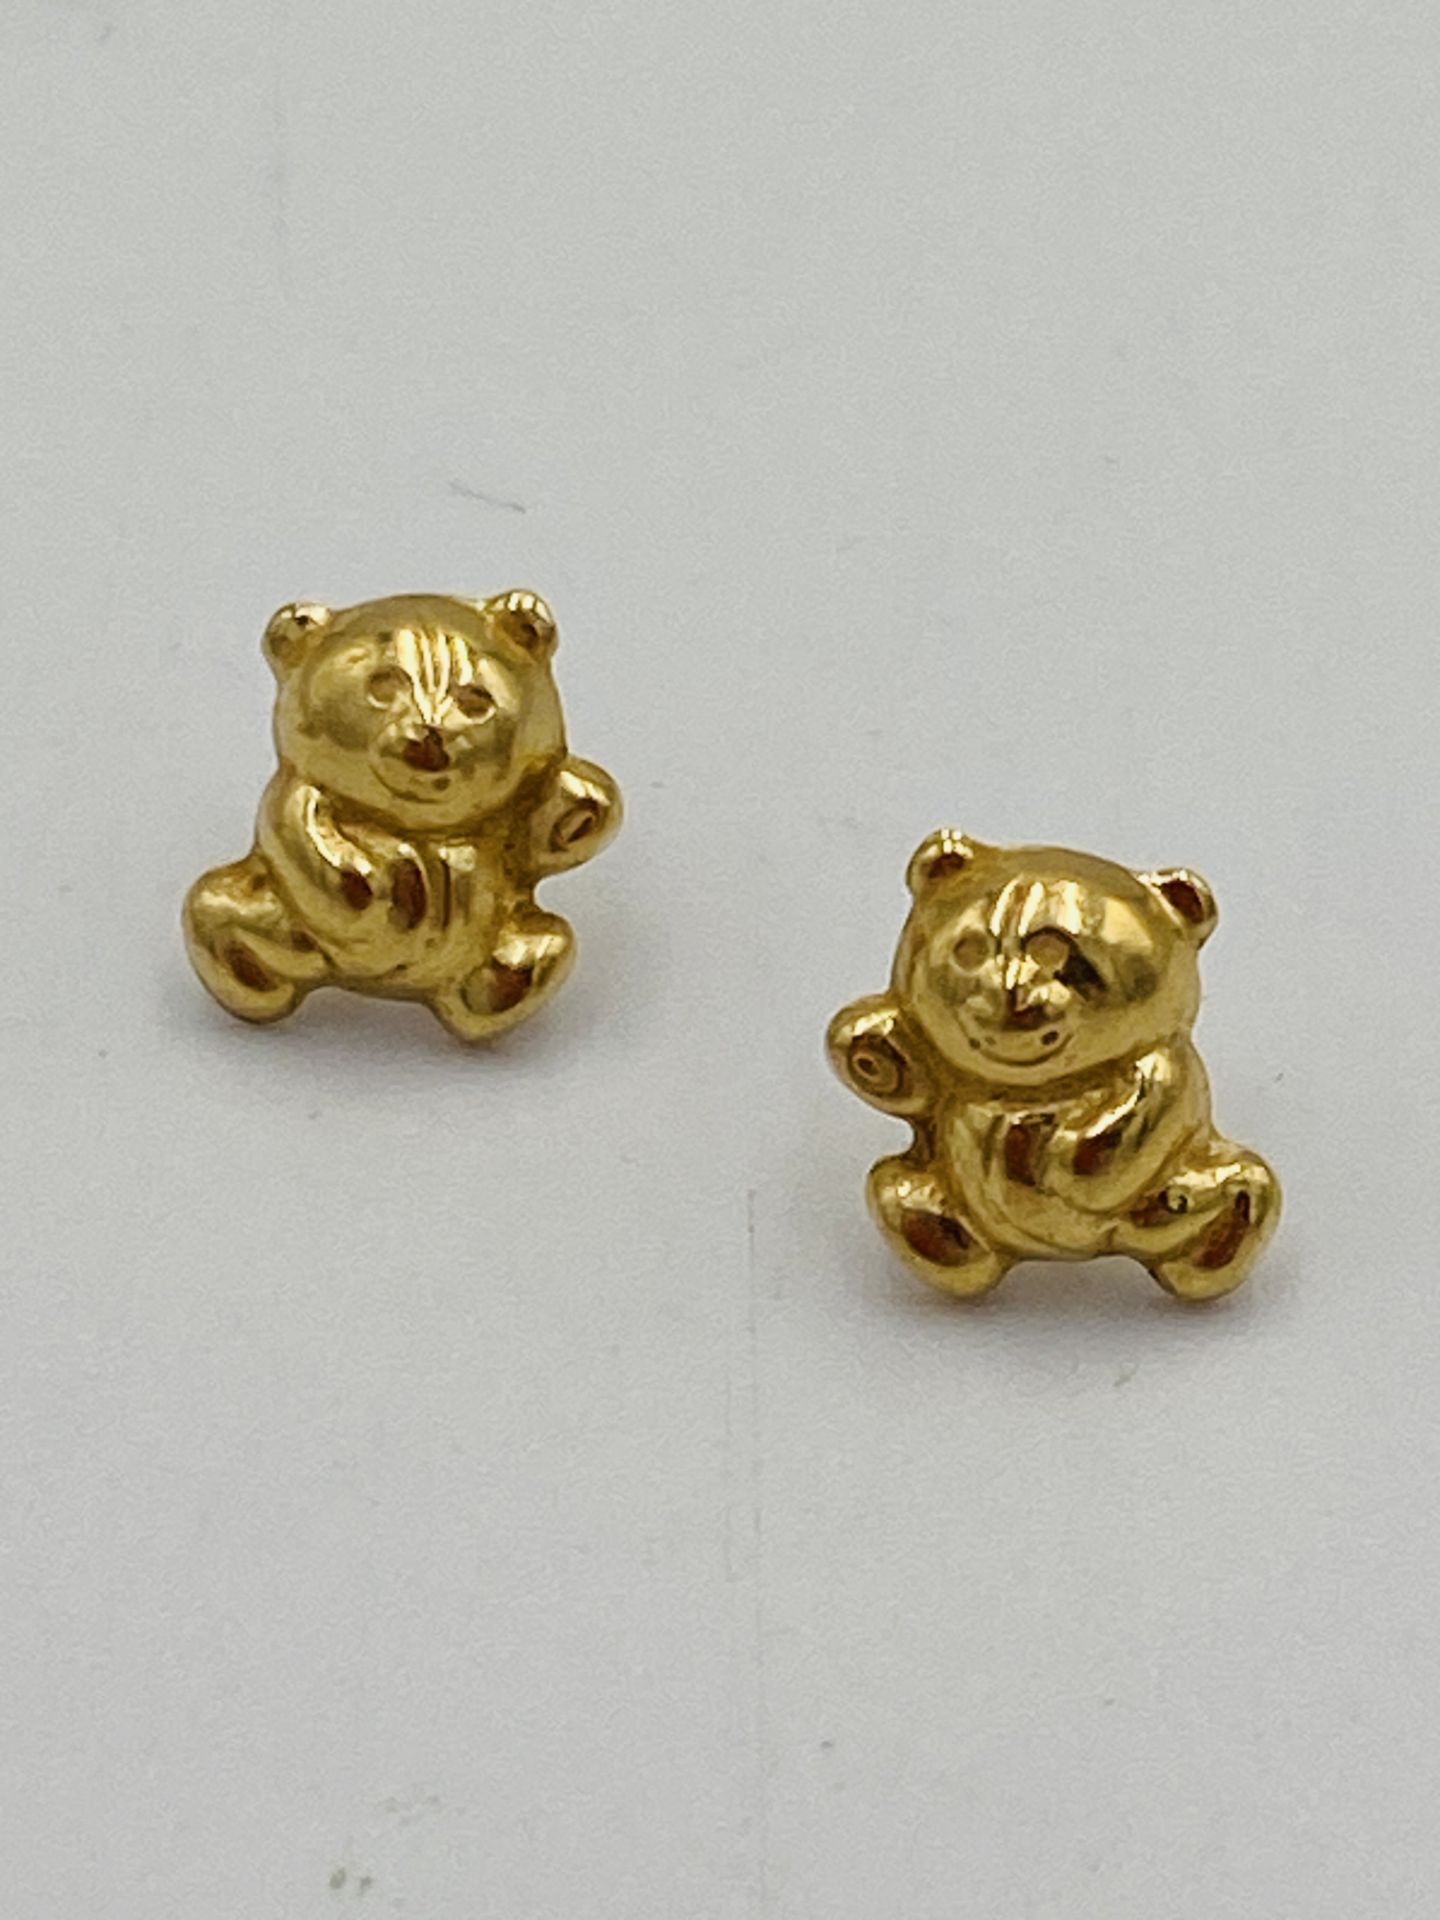 Pair of 9ct gold earrings - Image 2 of 3